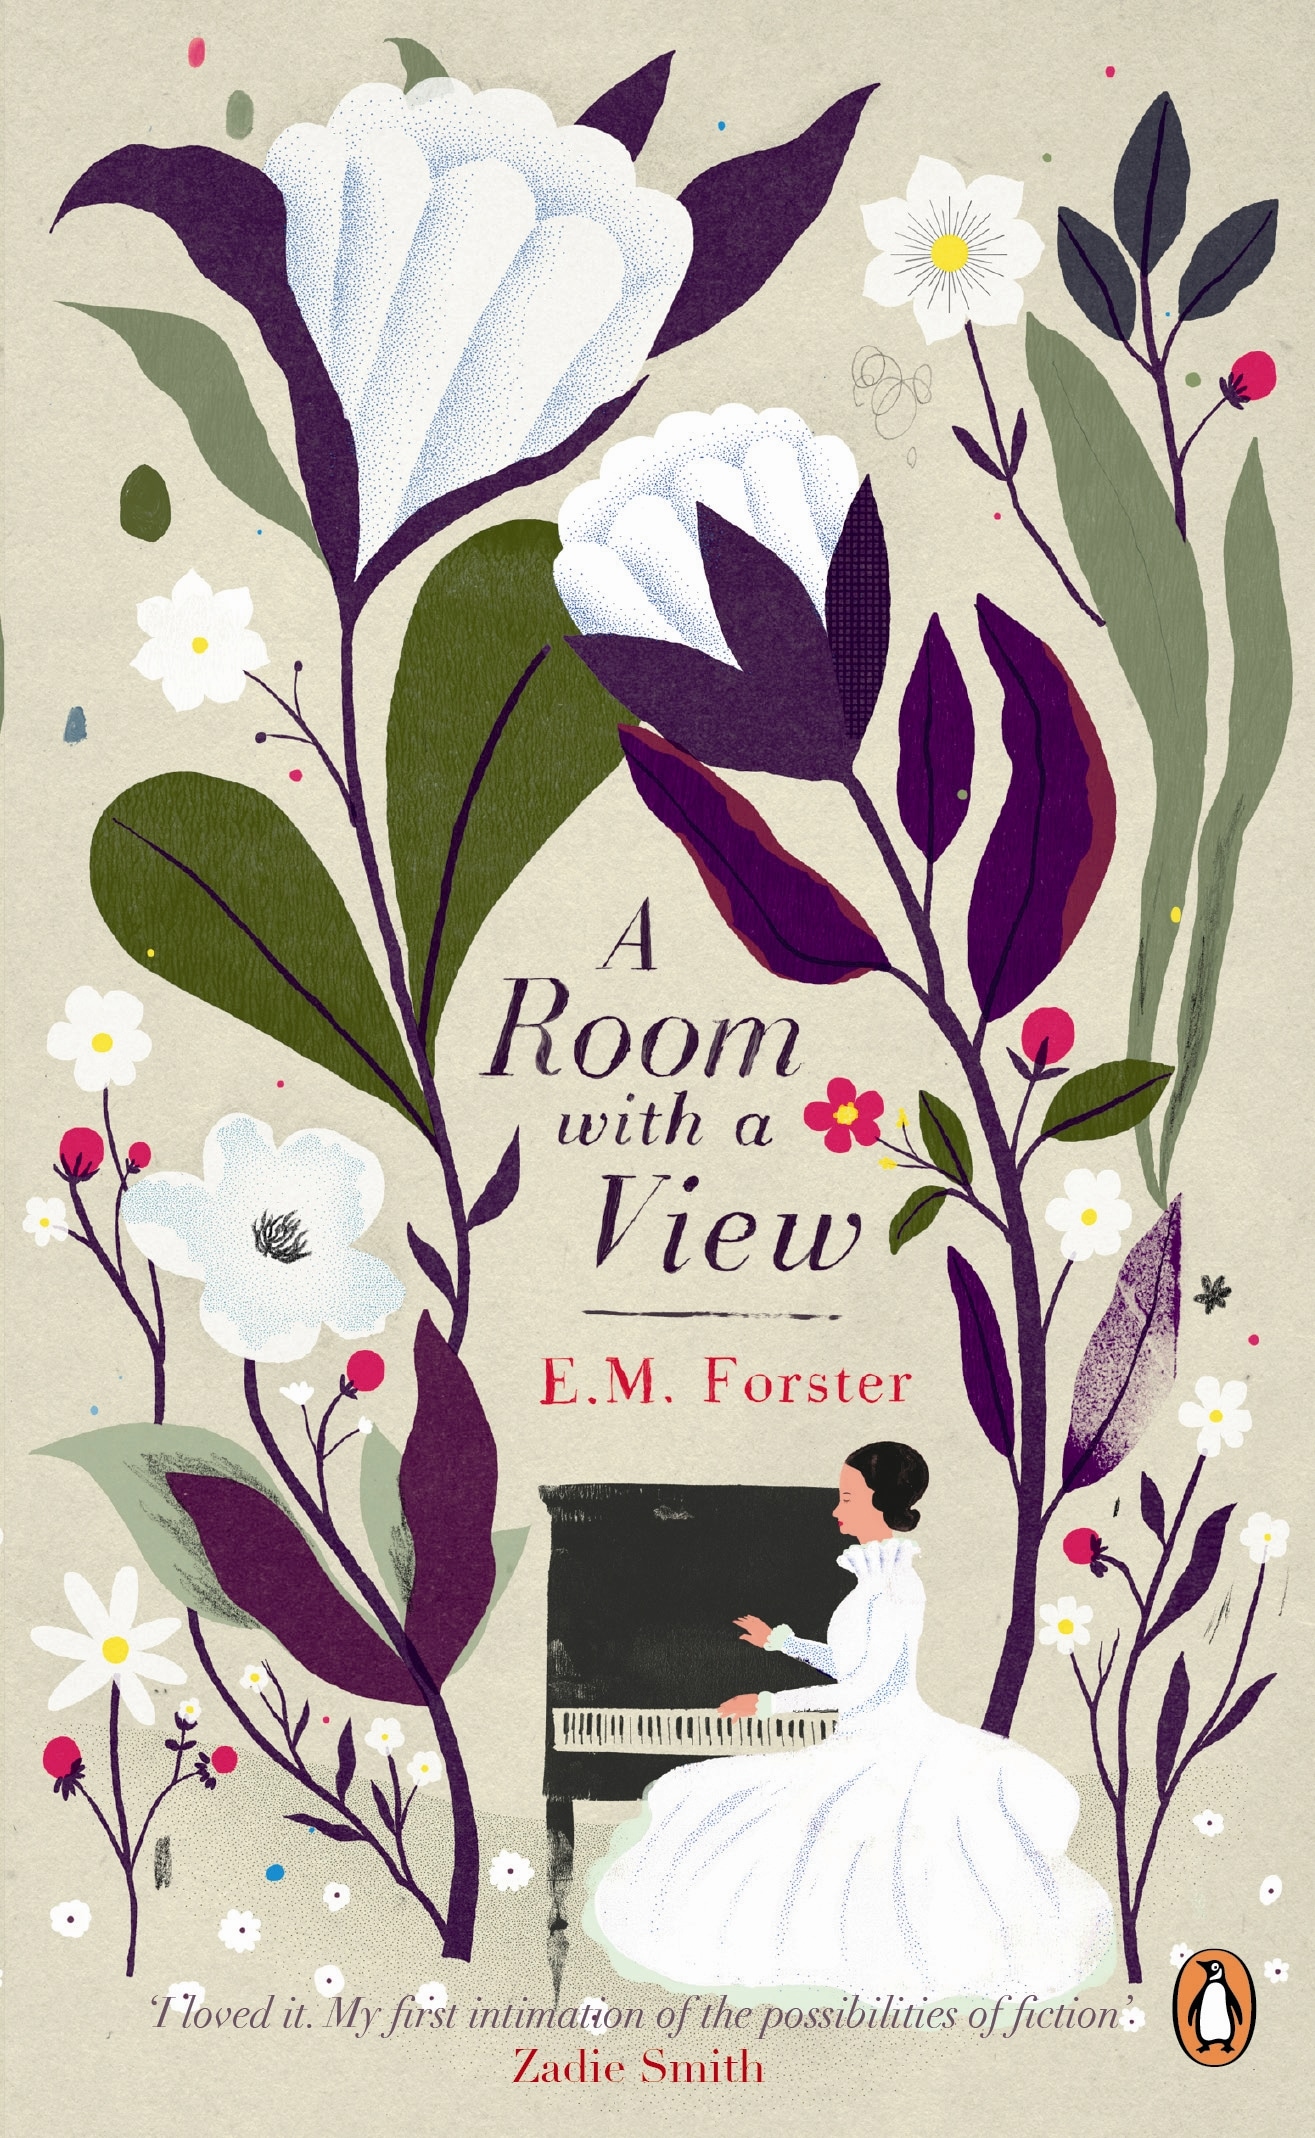 Book “A Room with a View” by E M Forster — April 7, 2011